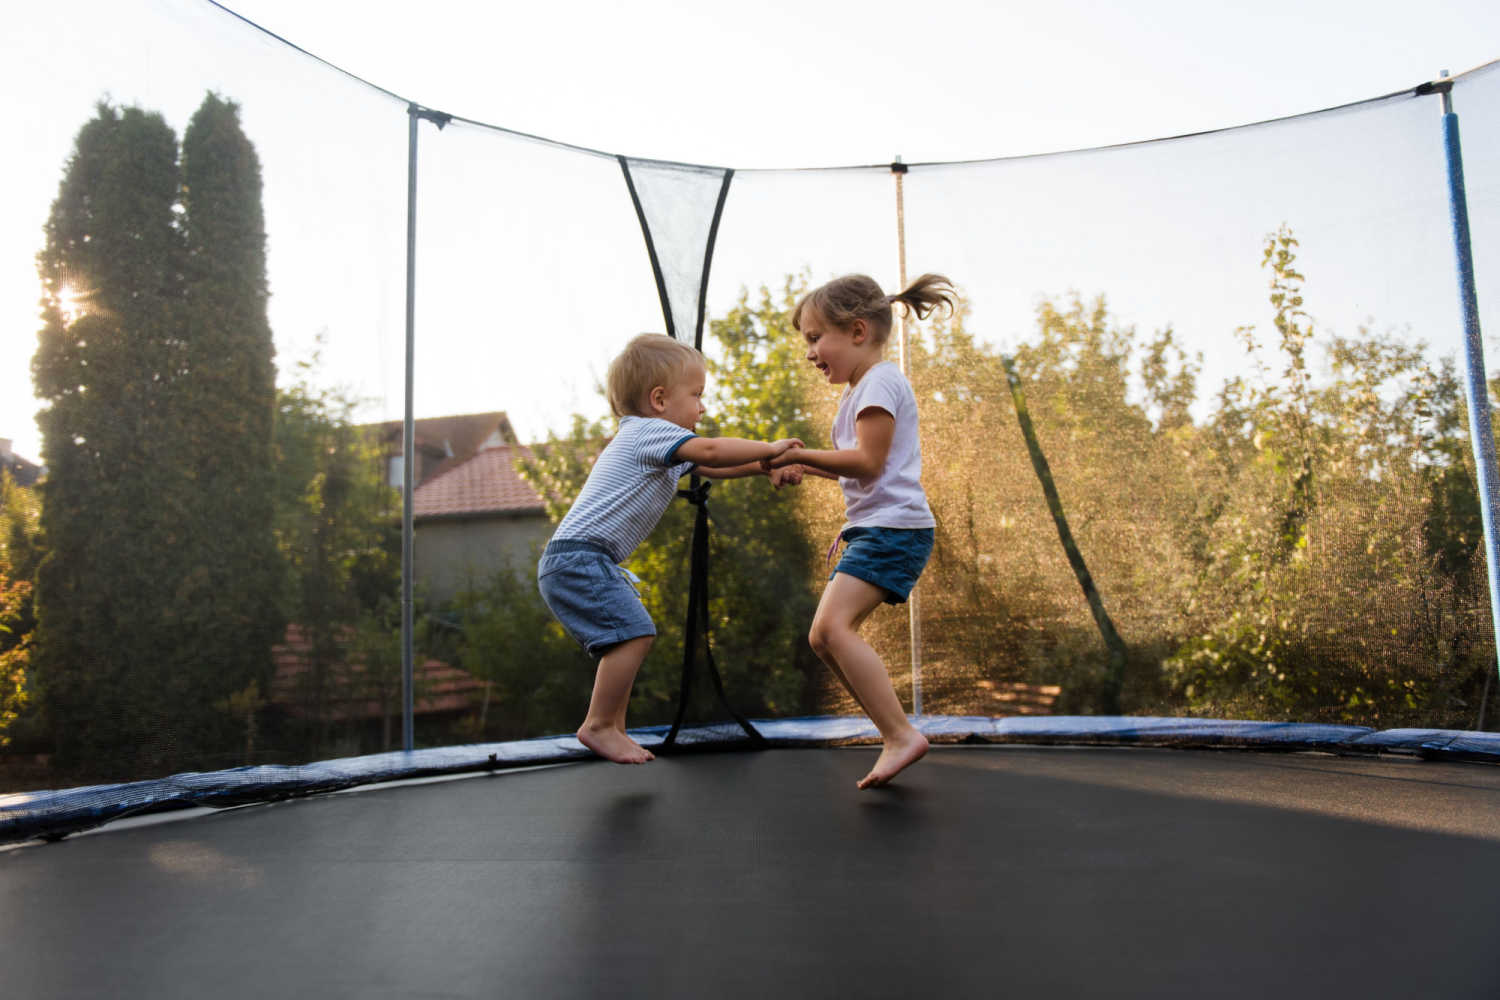 When toddlers start jumping trampoline may be a good option for practice 